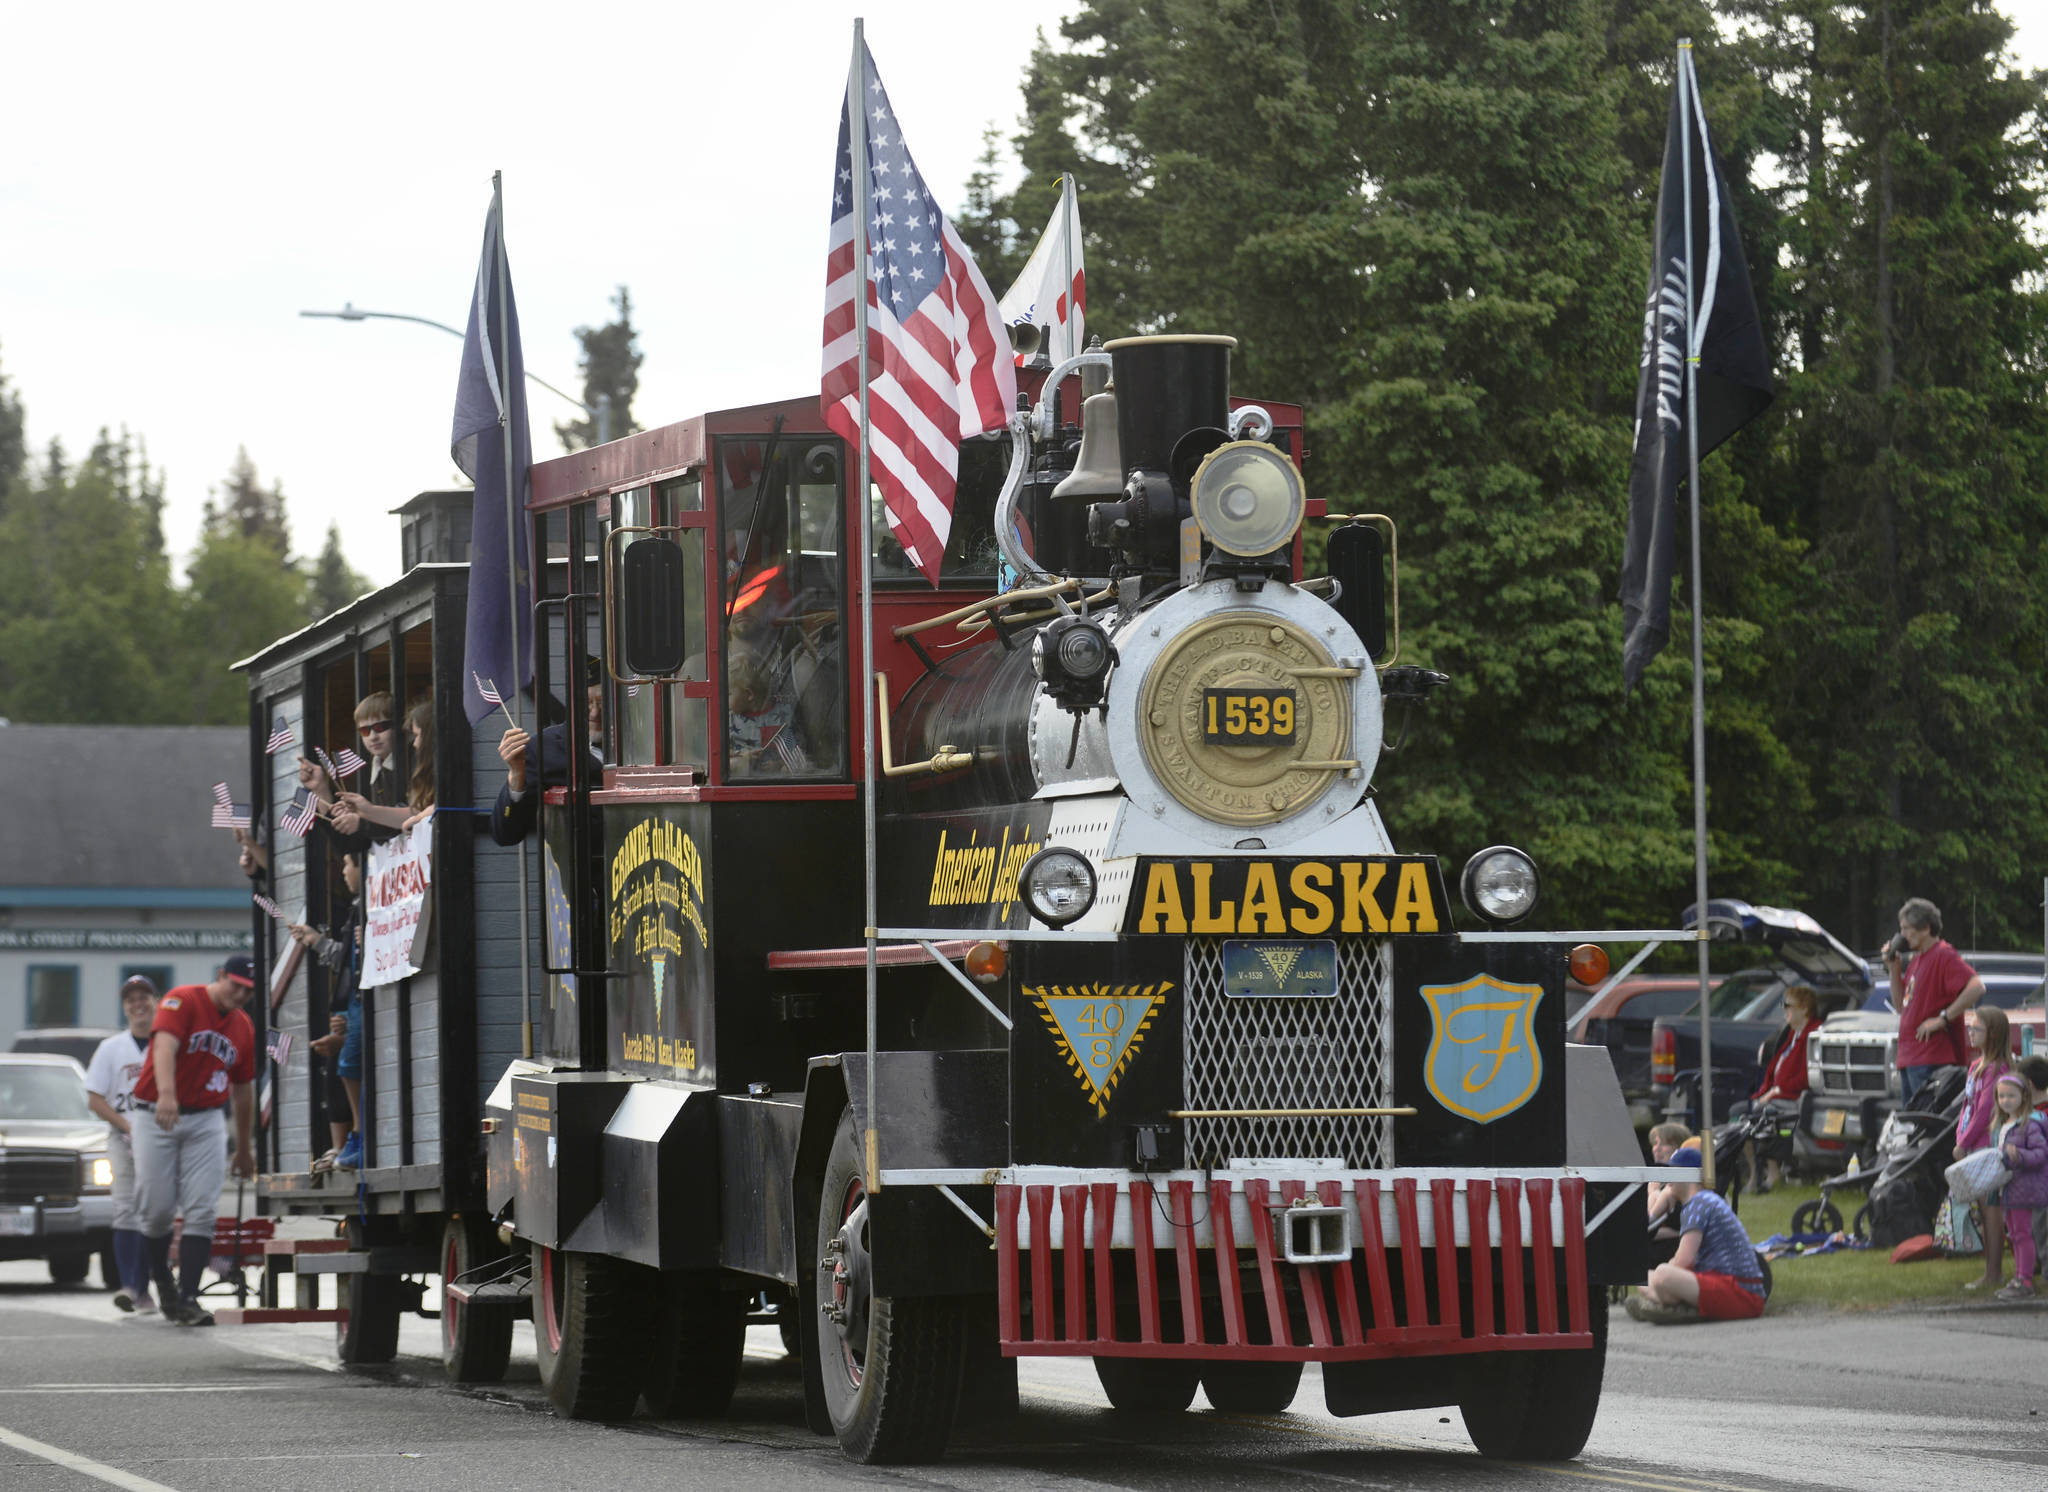 Kenai’s American Legion Post 20 drives their truck remodeled as a steam locomotive during Kenai’s Fourth of July parade on Wednesday, July 4, 2018 in Kenai, Alaska. Aboard are members of the Legion-sponsored Twins baseball team. (Ben Boettger/Peninsula Clarion)                                  Snare drummers from Kenai Central High School’s drumline perform in the Kenai’s Fourth of July parade on Wednesday, July 4, 2018 in Kenai, Alaska. (Ben Boettger/Peninsula Clarion)                                 Wildland firefighters from the Alaska Division of Forestry march in Kenai’s Fourth of July parade on Wednesday, July 4 in Kenai, Alaska. (Ben Boettger/Peninsula Clarion)